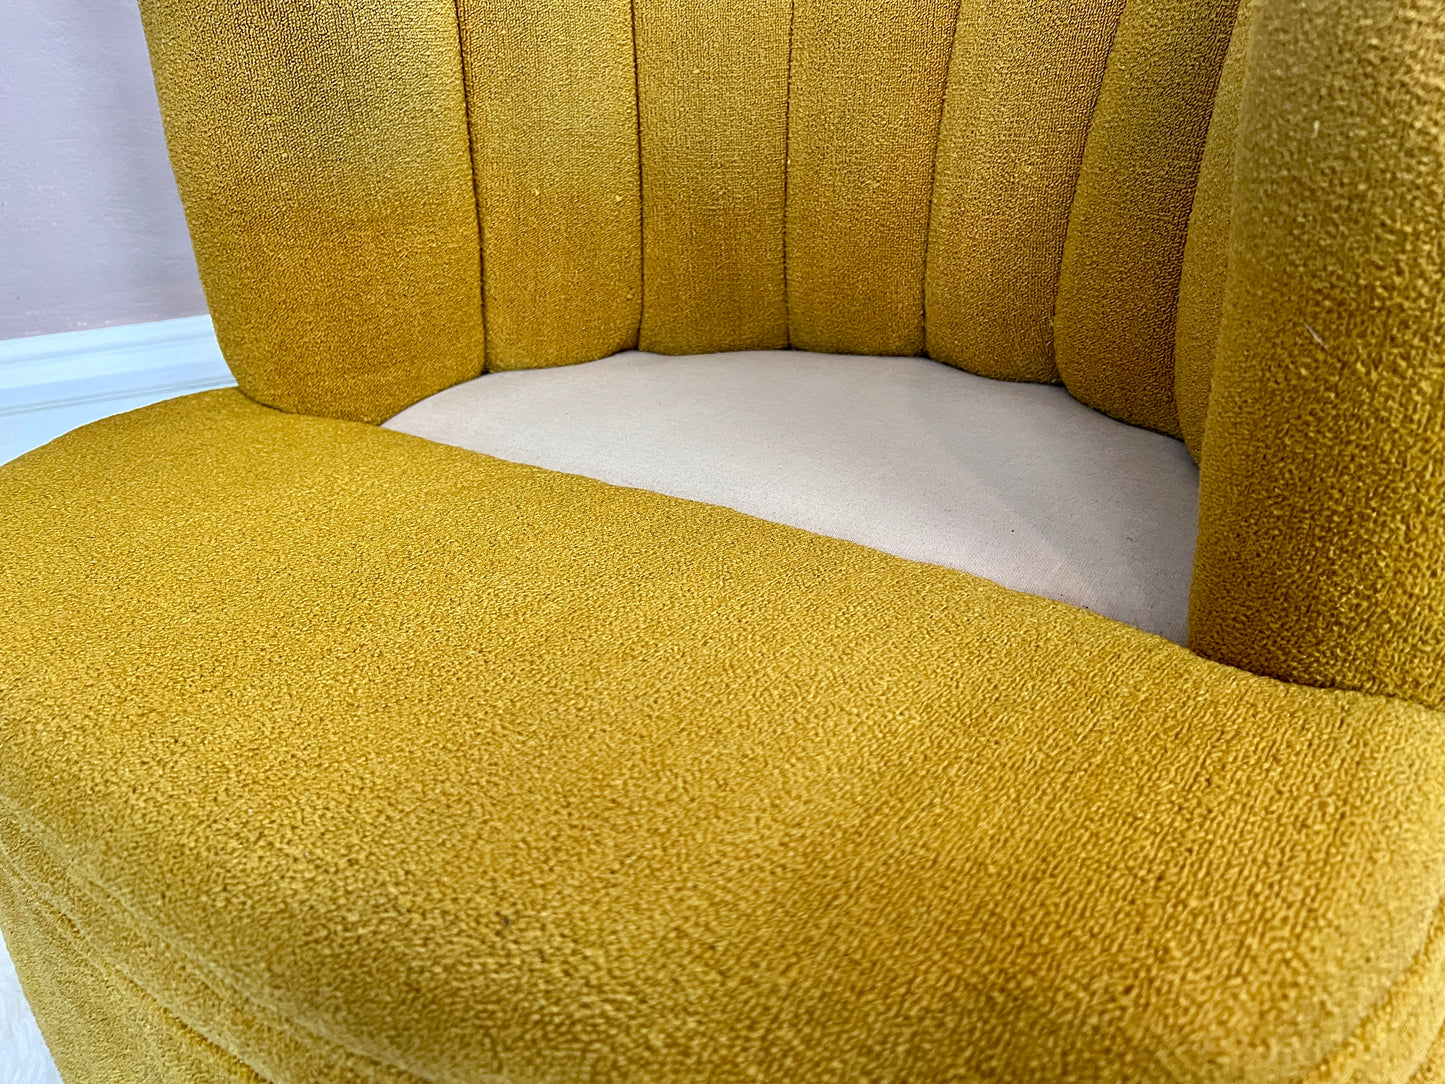 The Colonel Mustard Chair